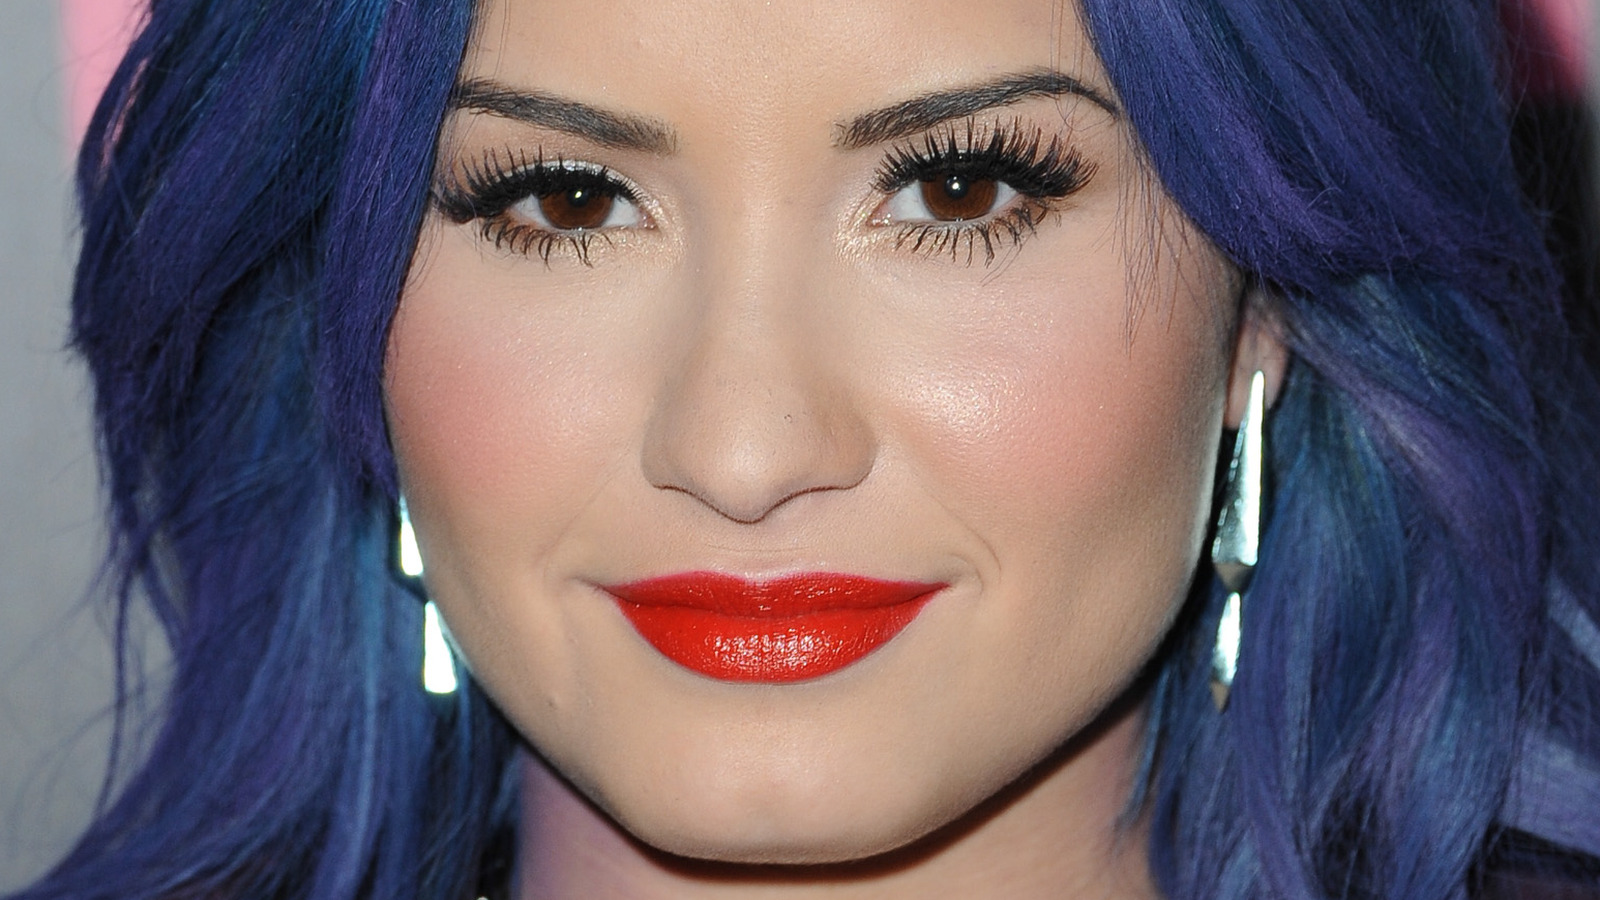 5. "Celebrities Rocking Turquoise Blue Hair Color" - wide 1